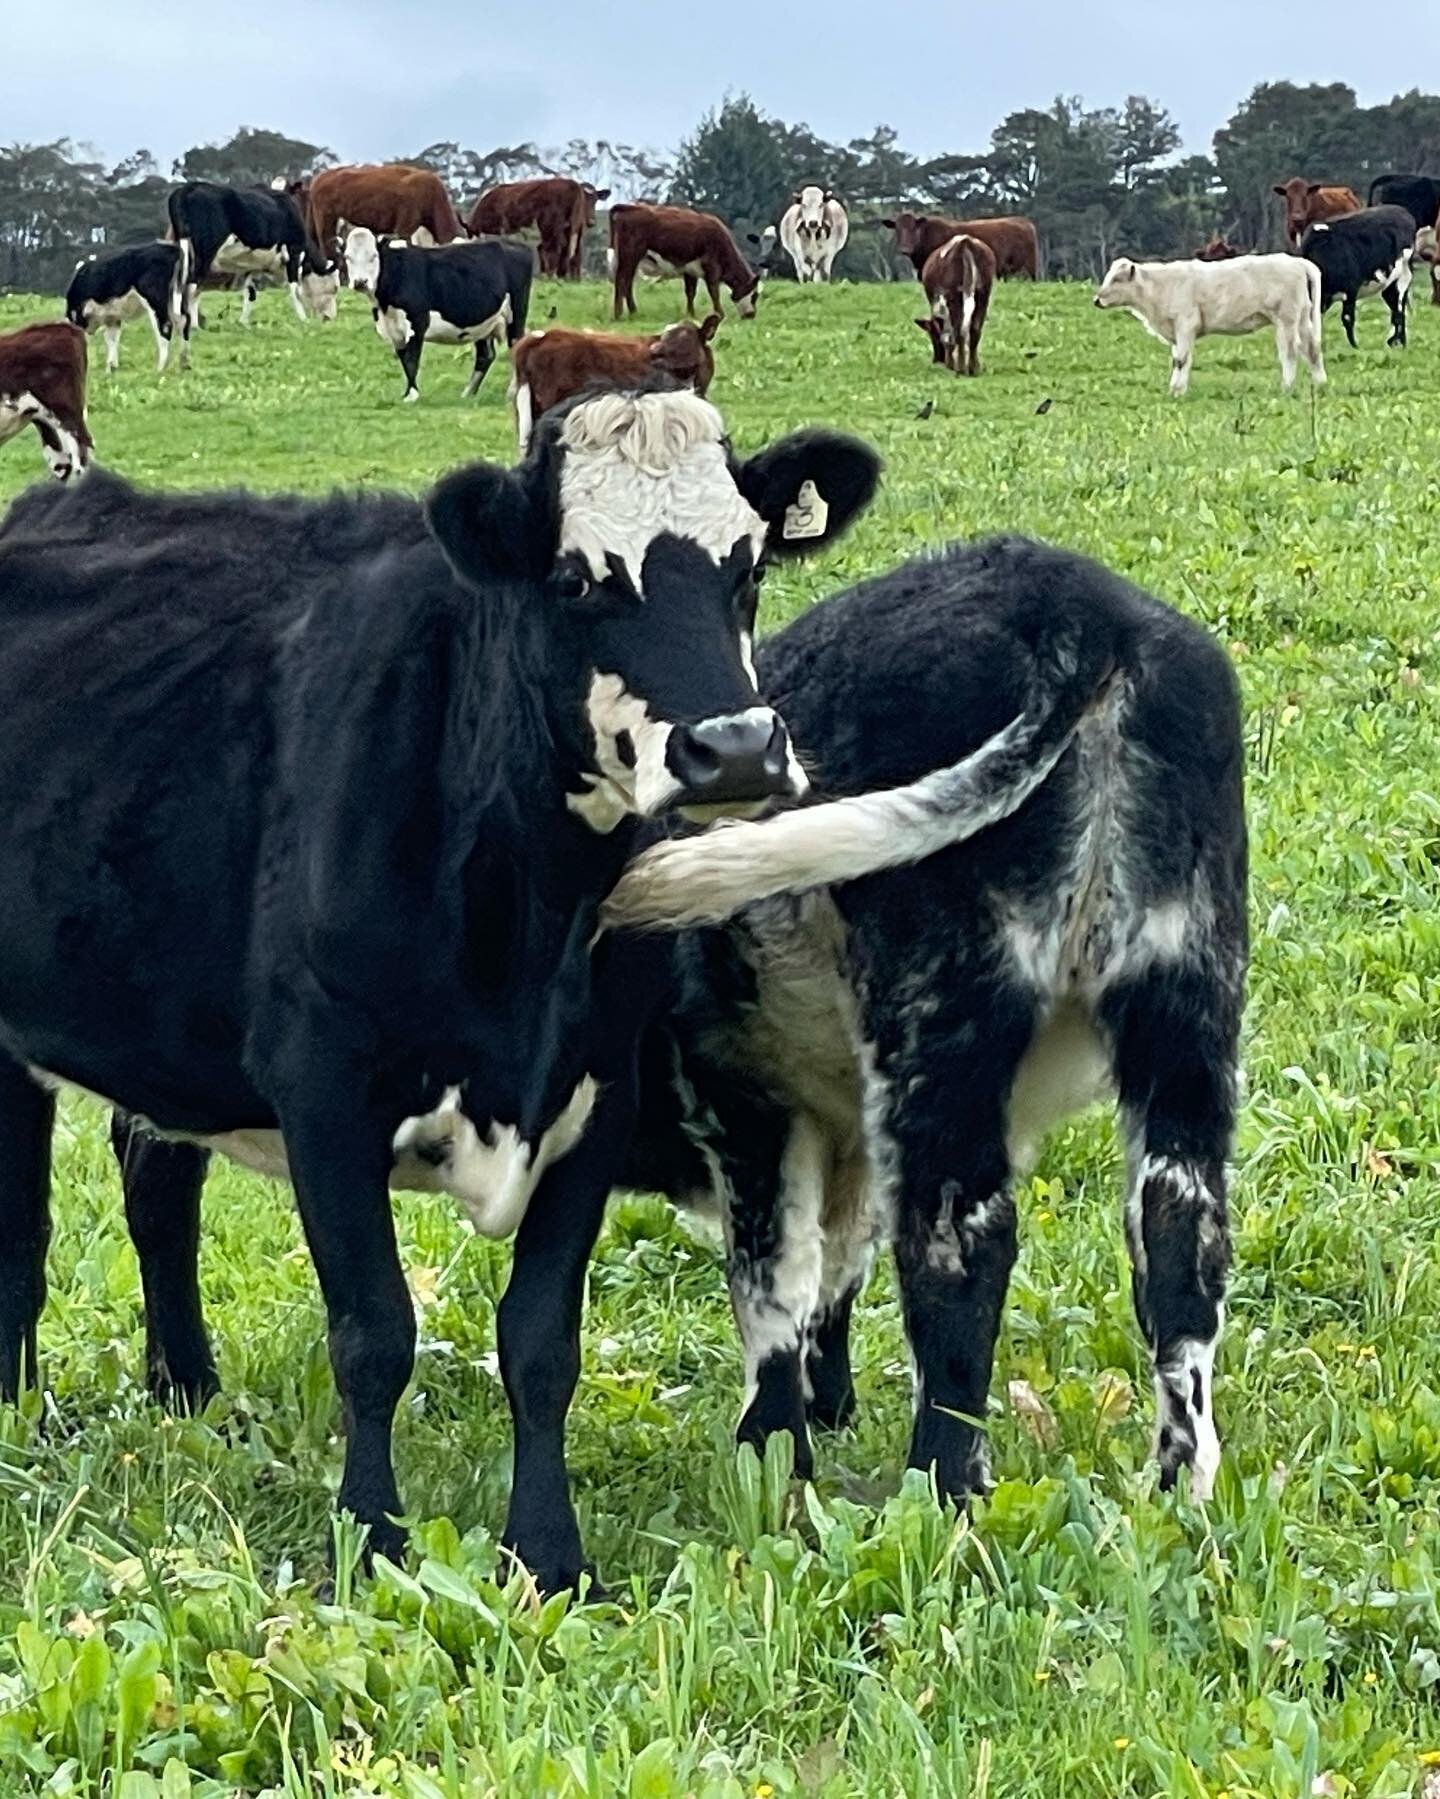 Our 8 month old calves enjoying an afternoon drink 😍